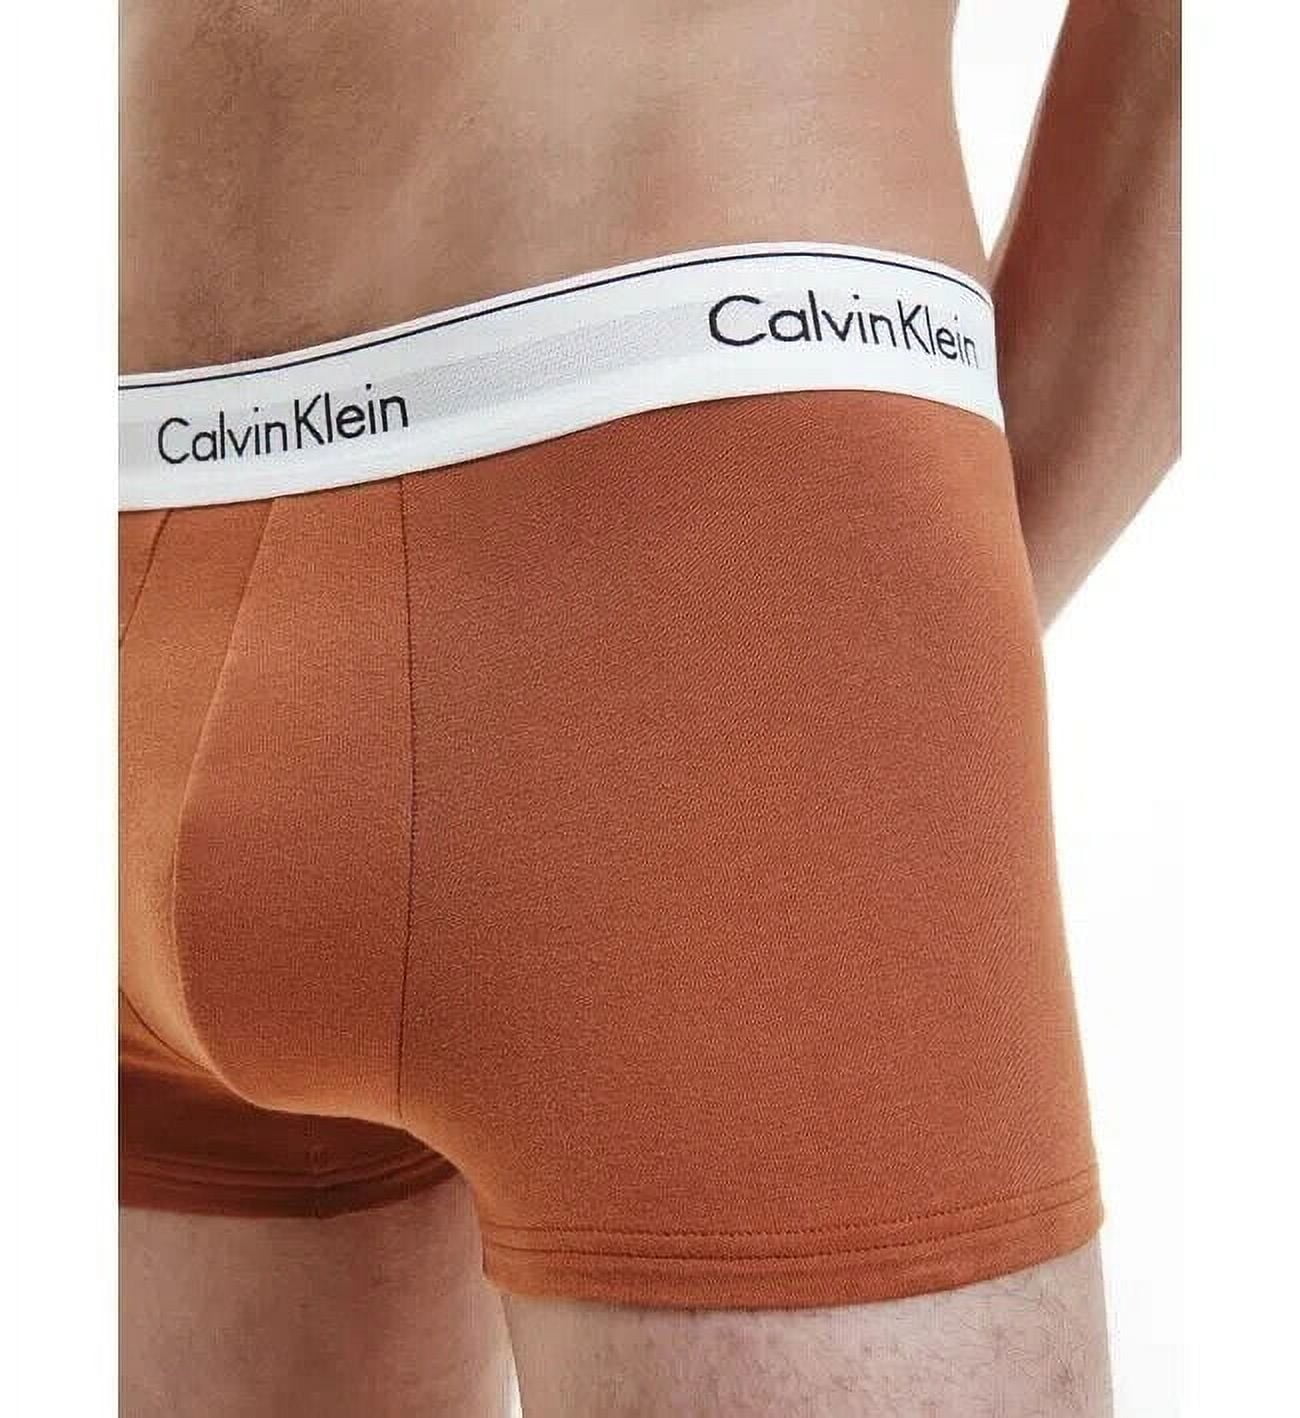 Calvin Klein Cotton Stretch Boxer Briefs 3-Pack White NU2666-100 - Free  Shipping at LASC